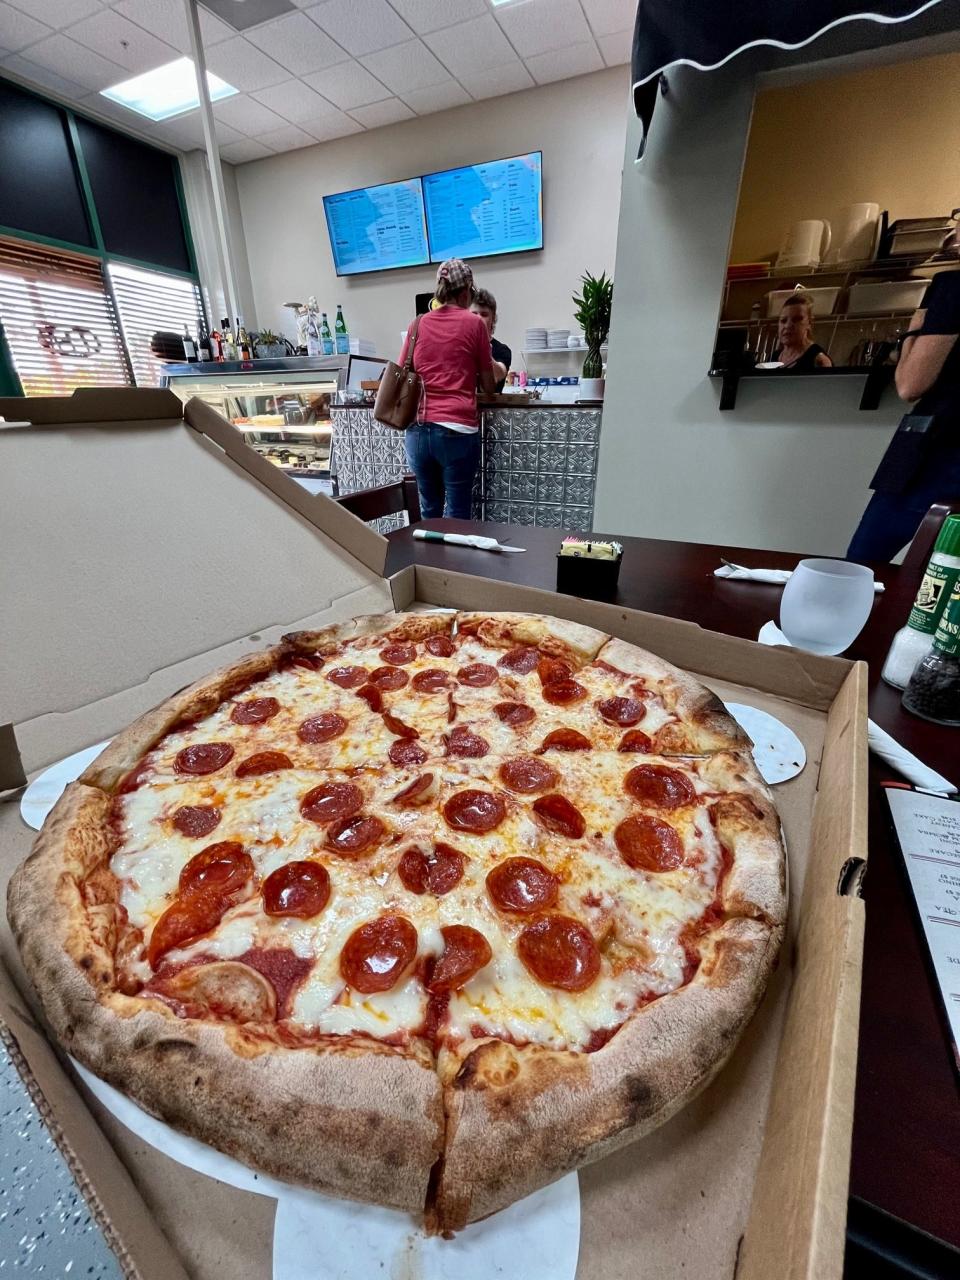 Get your pizza to-go or dine-in at Luciano's Too in Cape Coral.